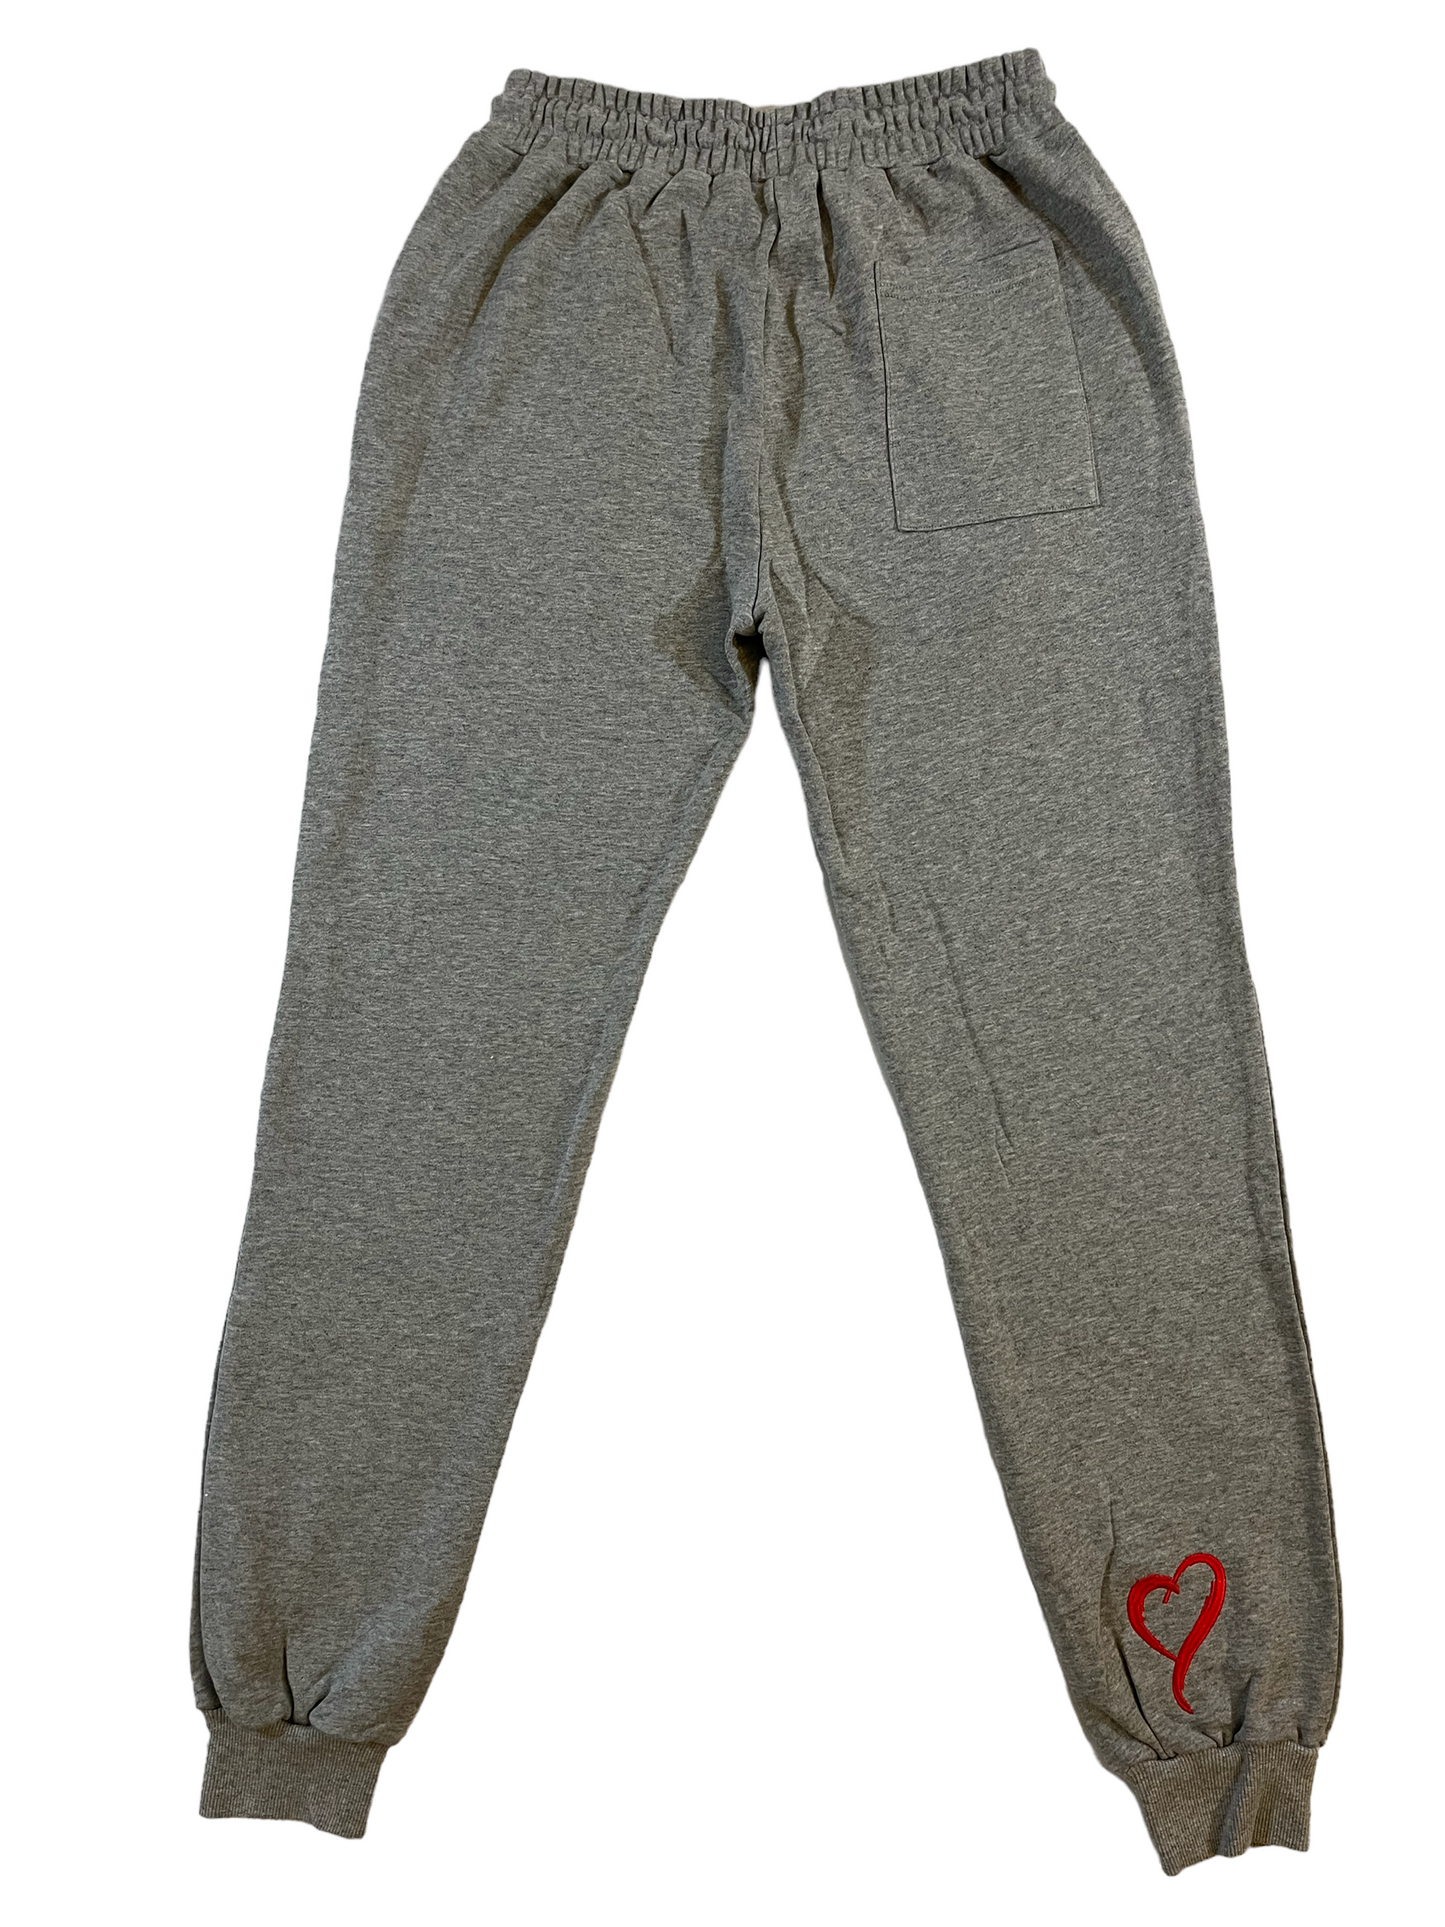 Joggers - Light Gray with Red Embroidery